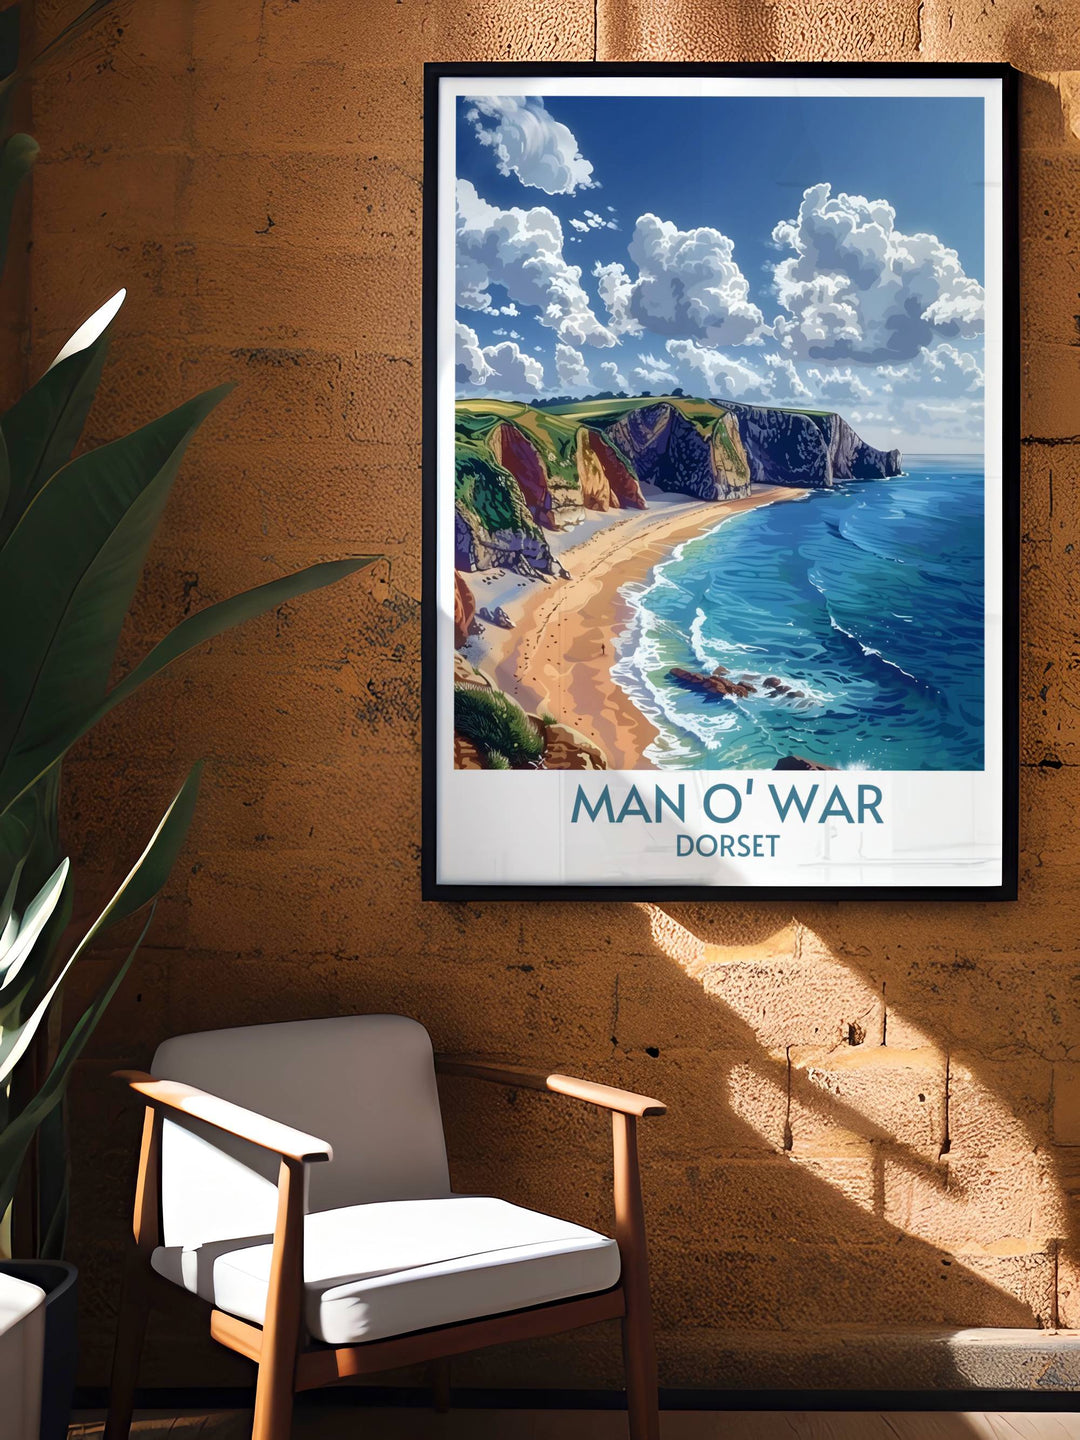 Durdle Door Arch and Man o War Beach Dorset artwork capturing the majestic beauty of the Jurassic Coast perfect for posters prints and home decor adding a touch of natural elegance to any room ideal for travel lovers and those seeking unique and meaningful gifts.